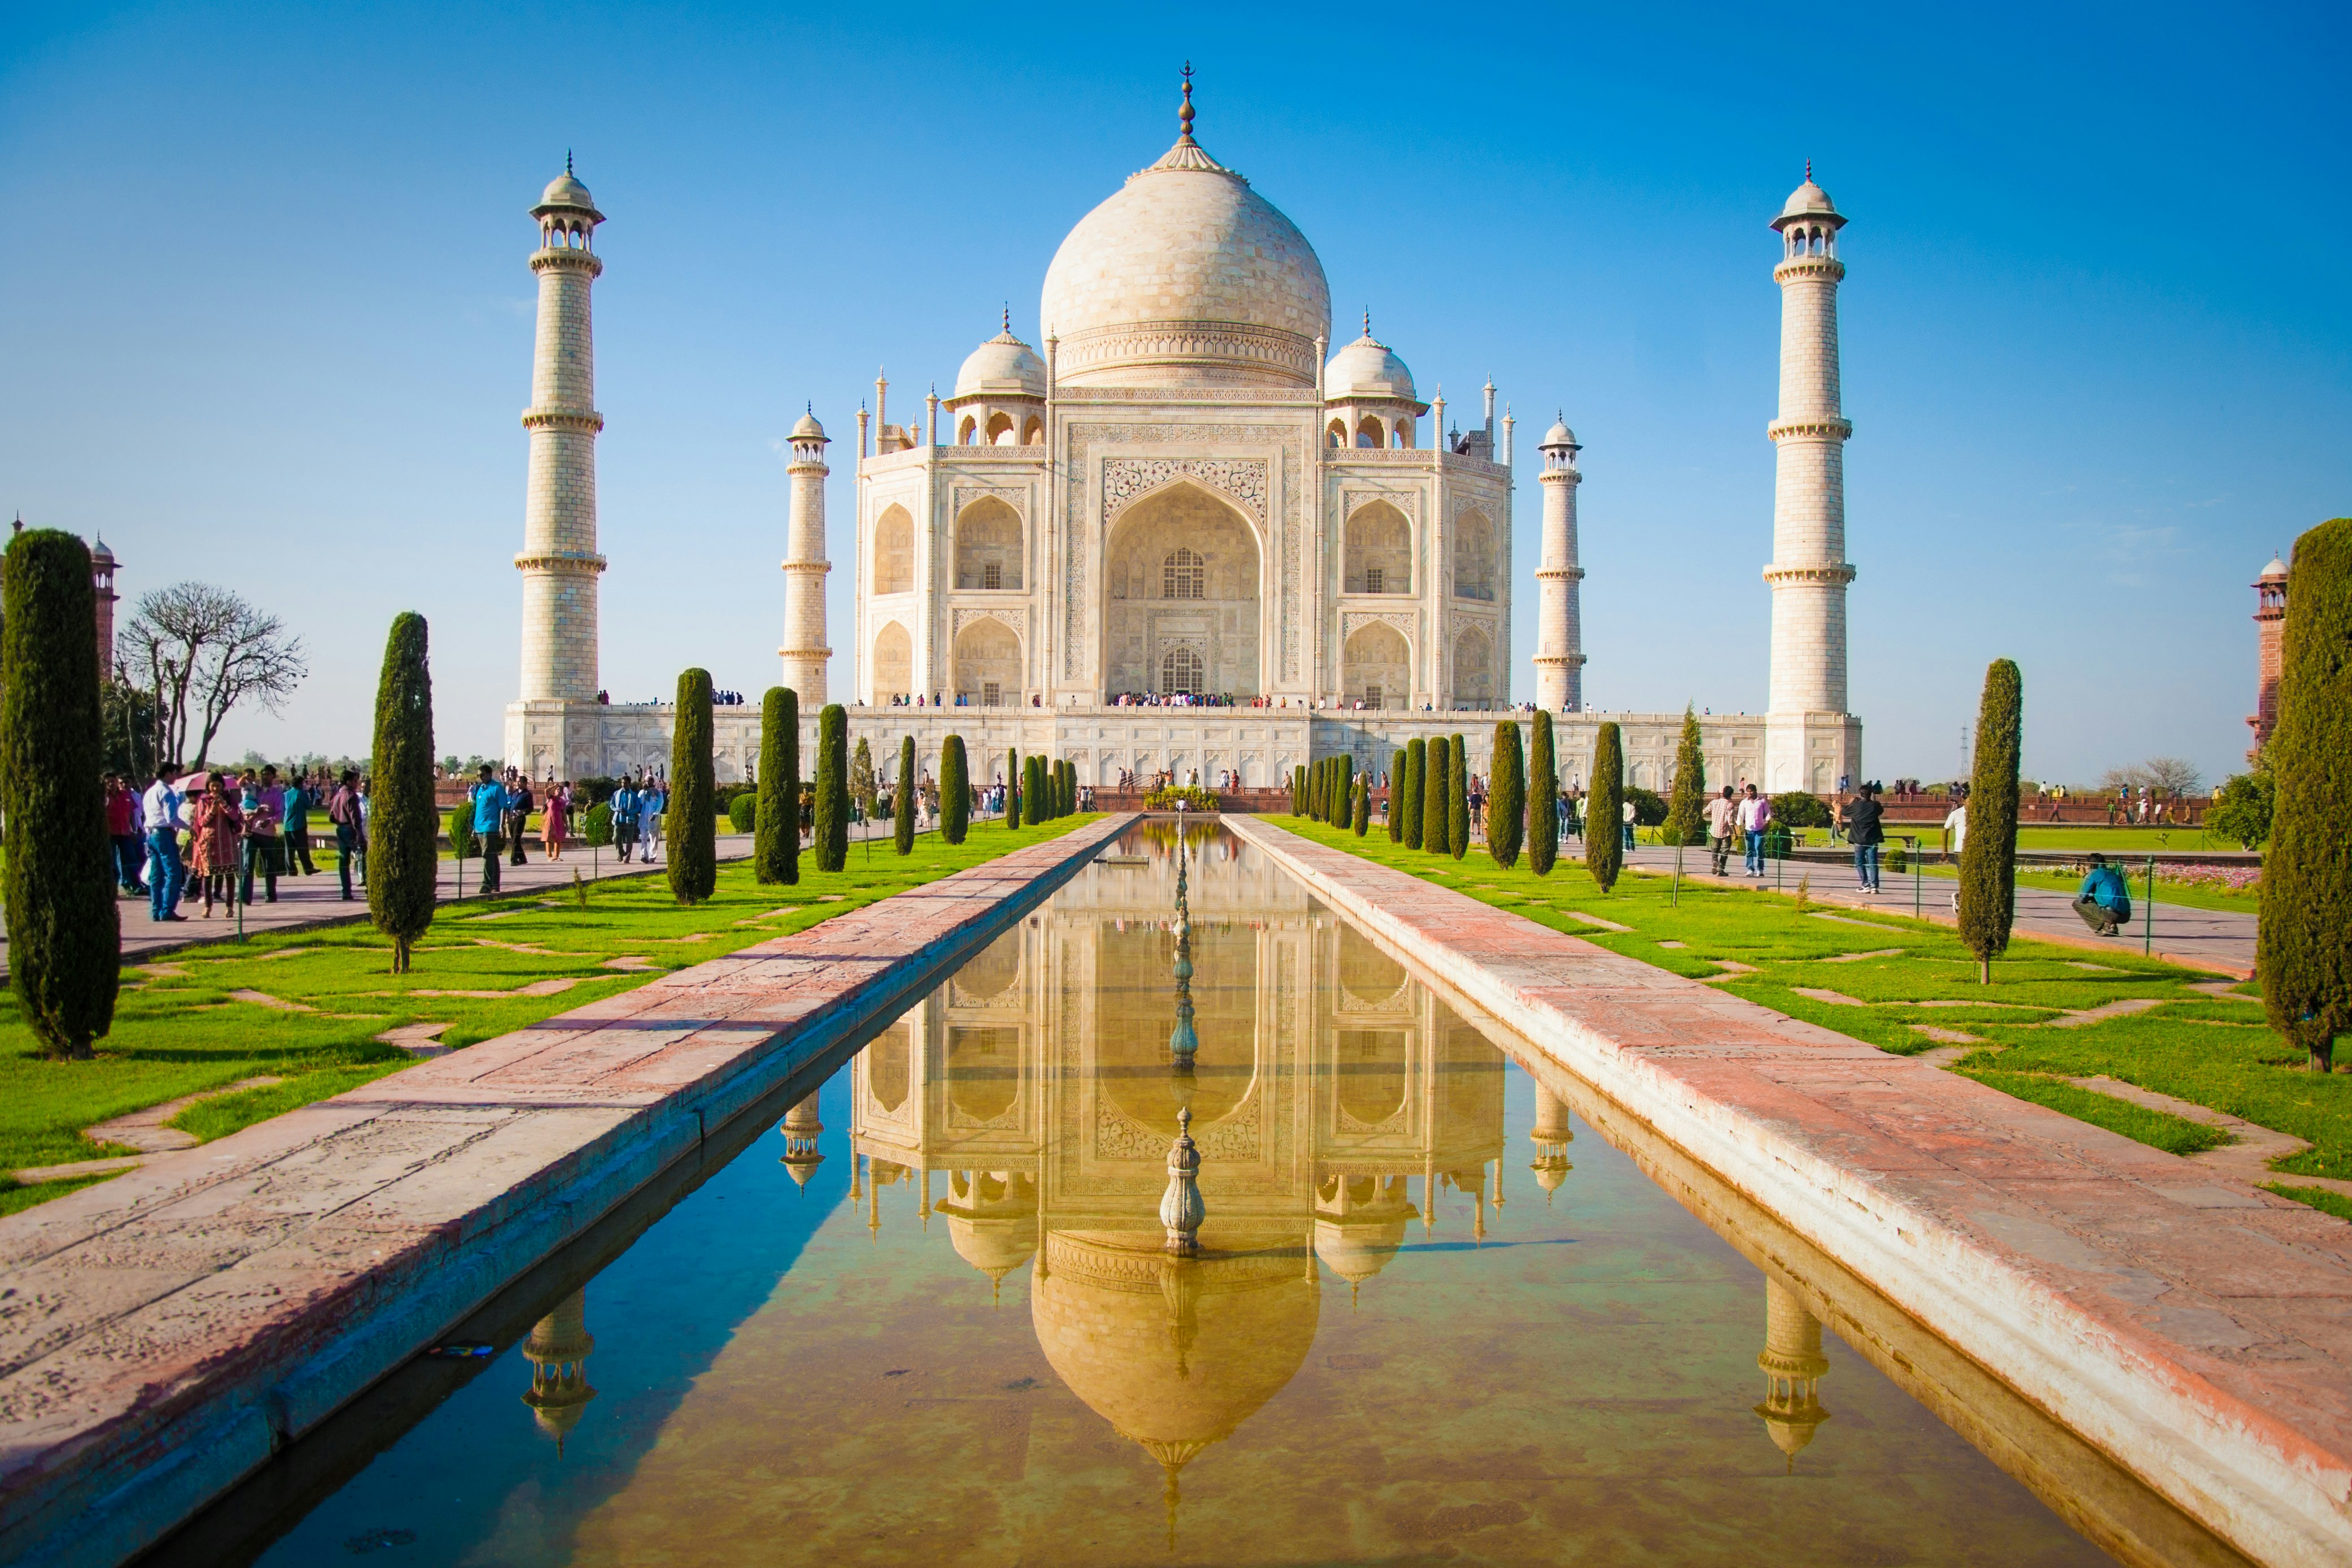 A channel of water leads through ornamental gardens to the Taj Mahal, a huge domed white marble monument with white minarets at each corner.